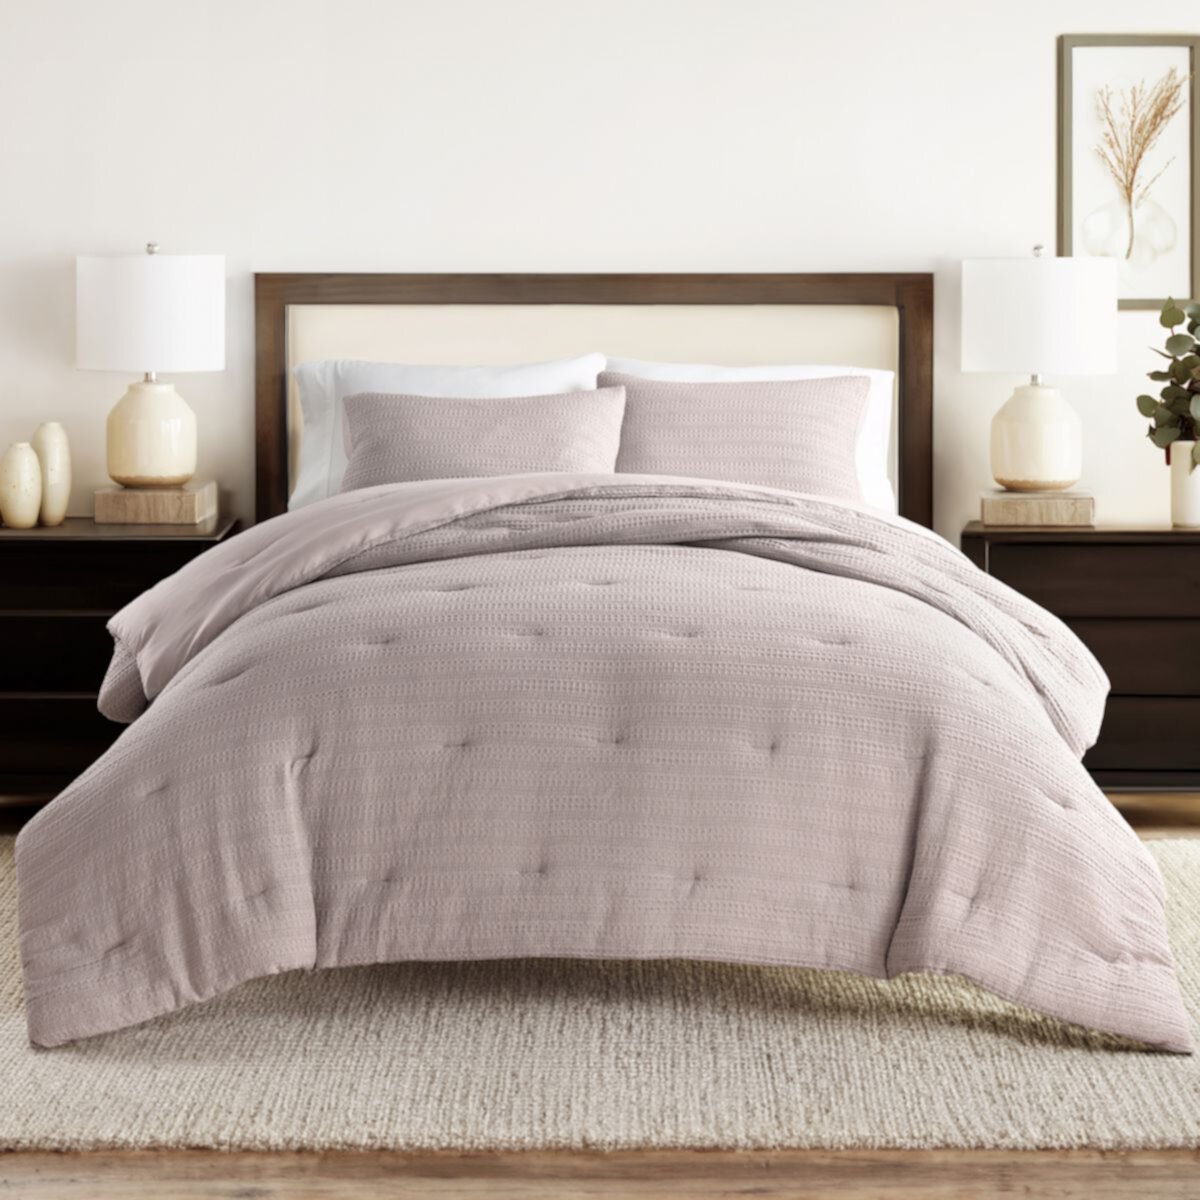 Home Collection All Season Down-Alternative Waffle Textured Comforter Set with Sham Home Collection